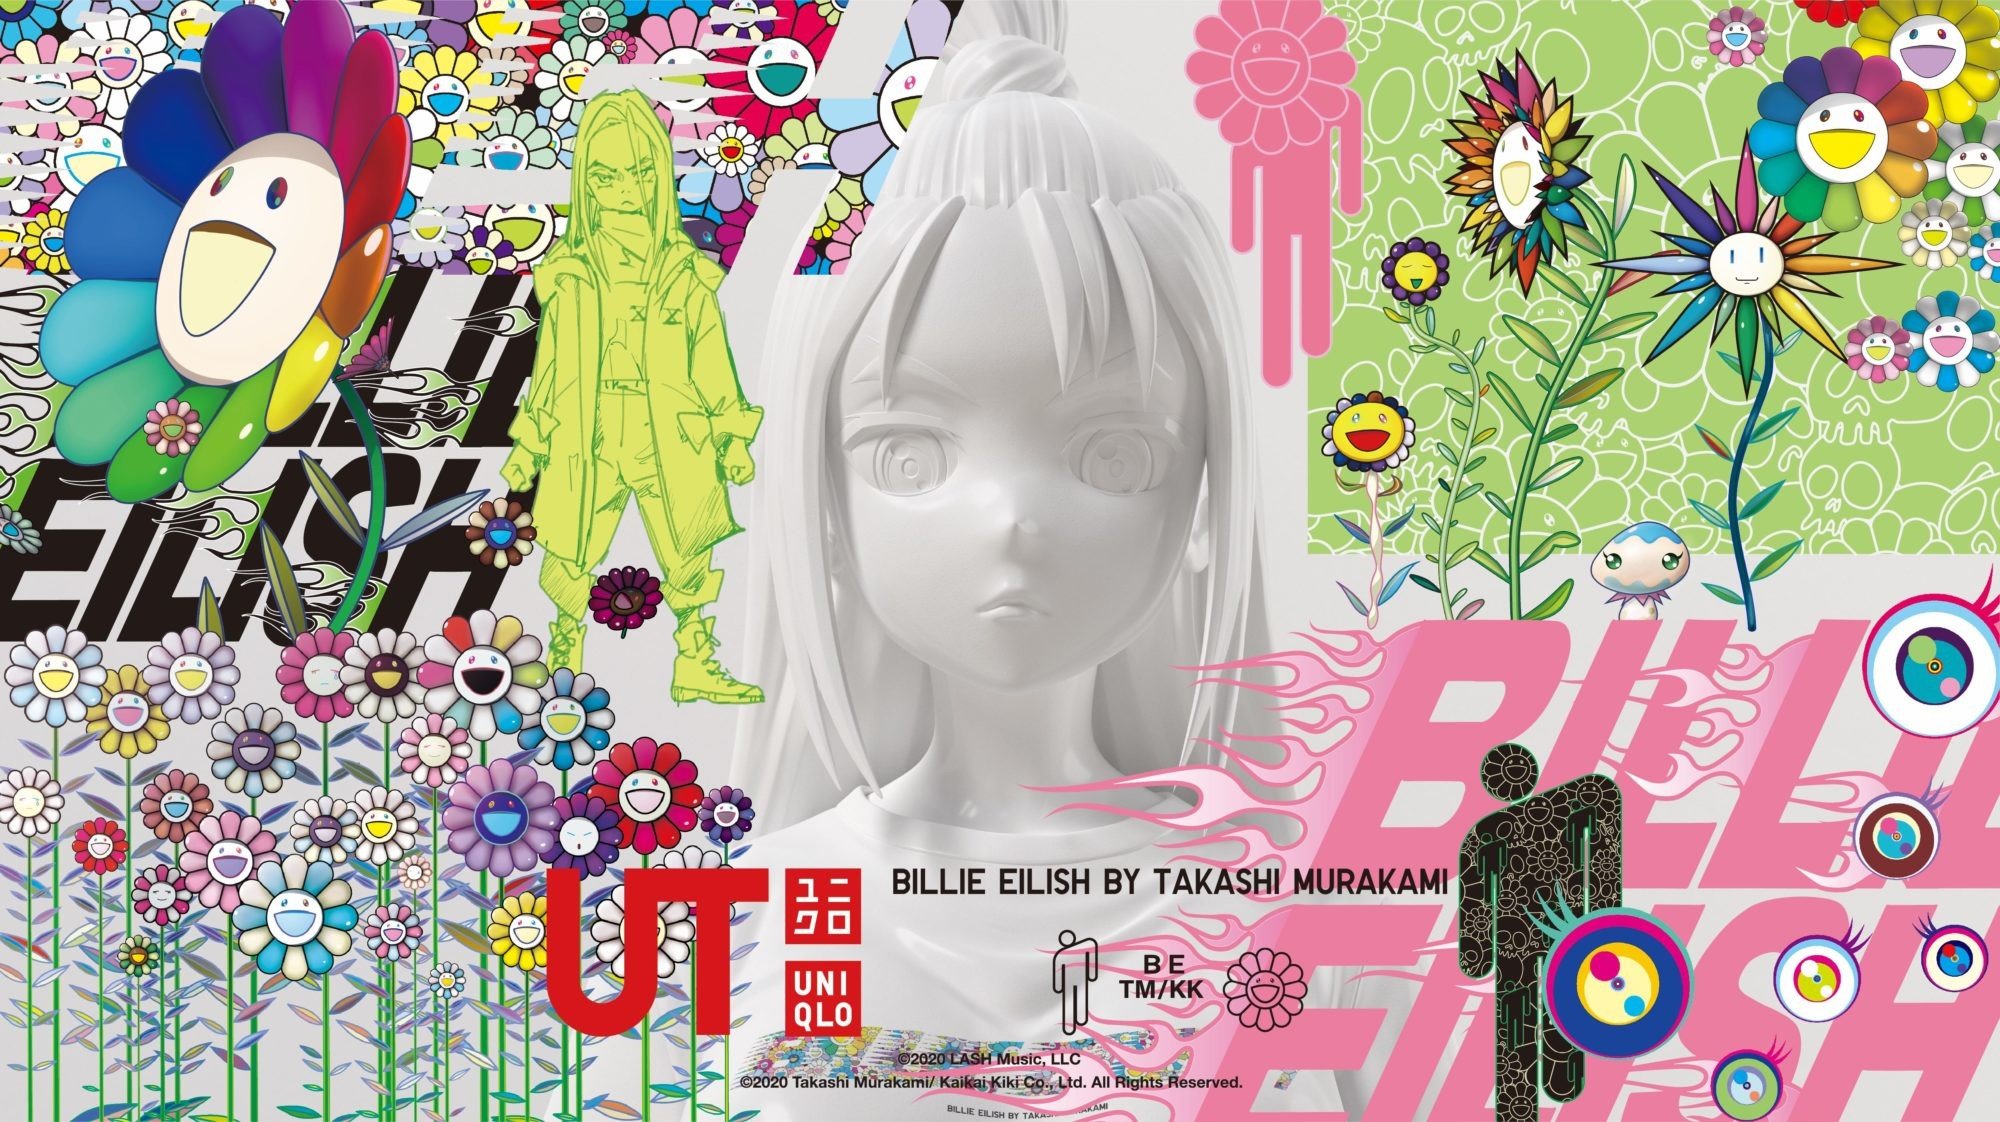 UNIQLO UT has miraculously made a collaboration with Japanese contemporary artist Takashi Murakami and musician Billie Eilish.